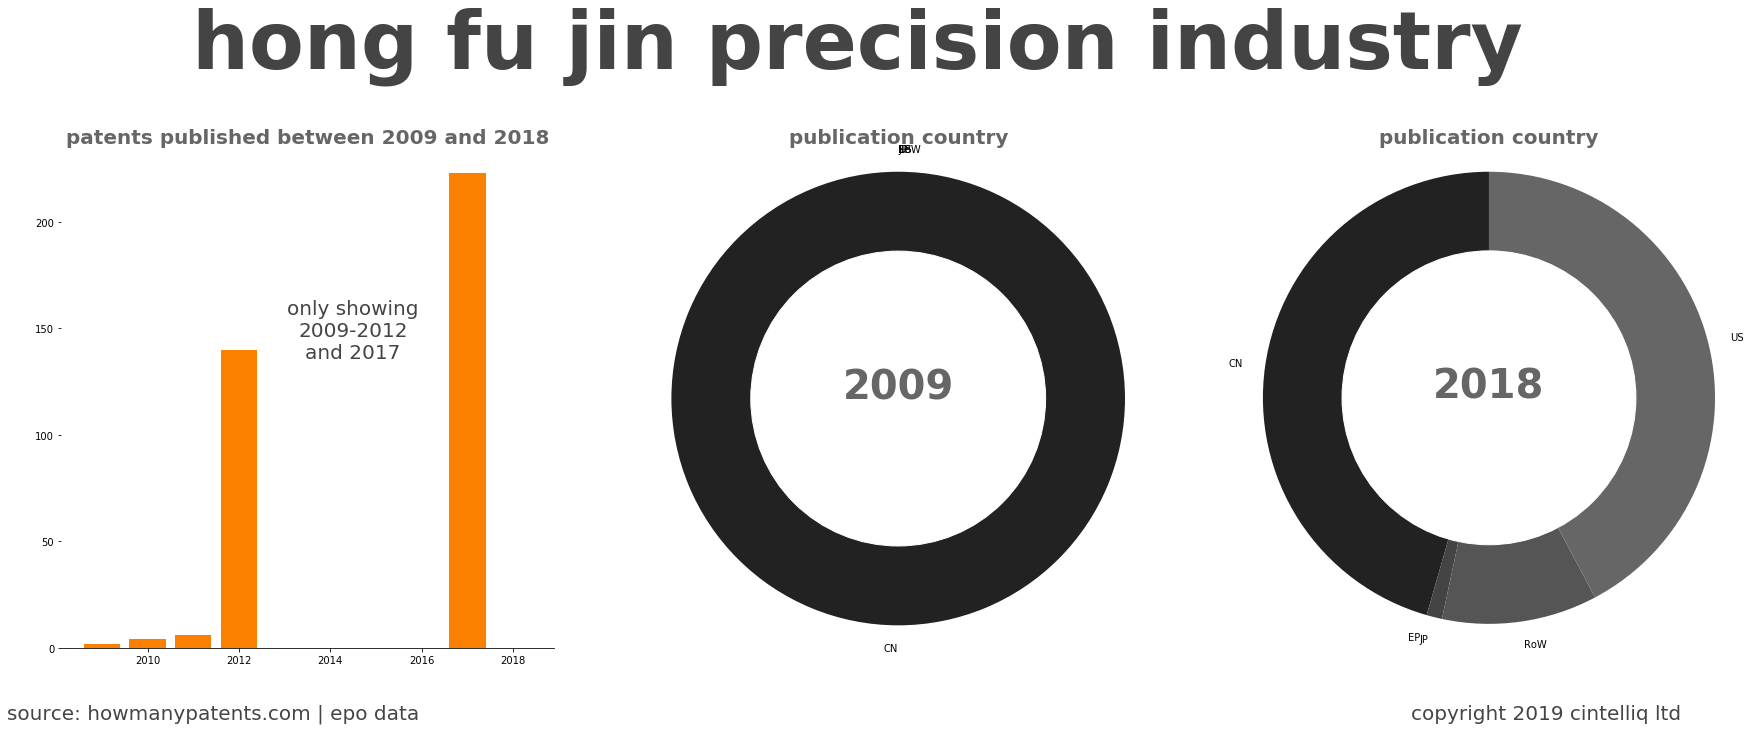 summary of patents for Hong Fu Jin Precision Industry 